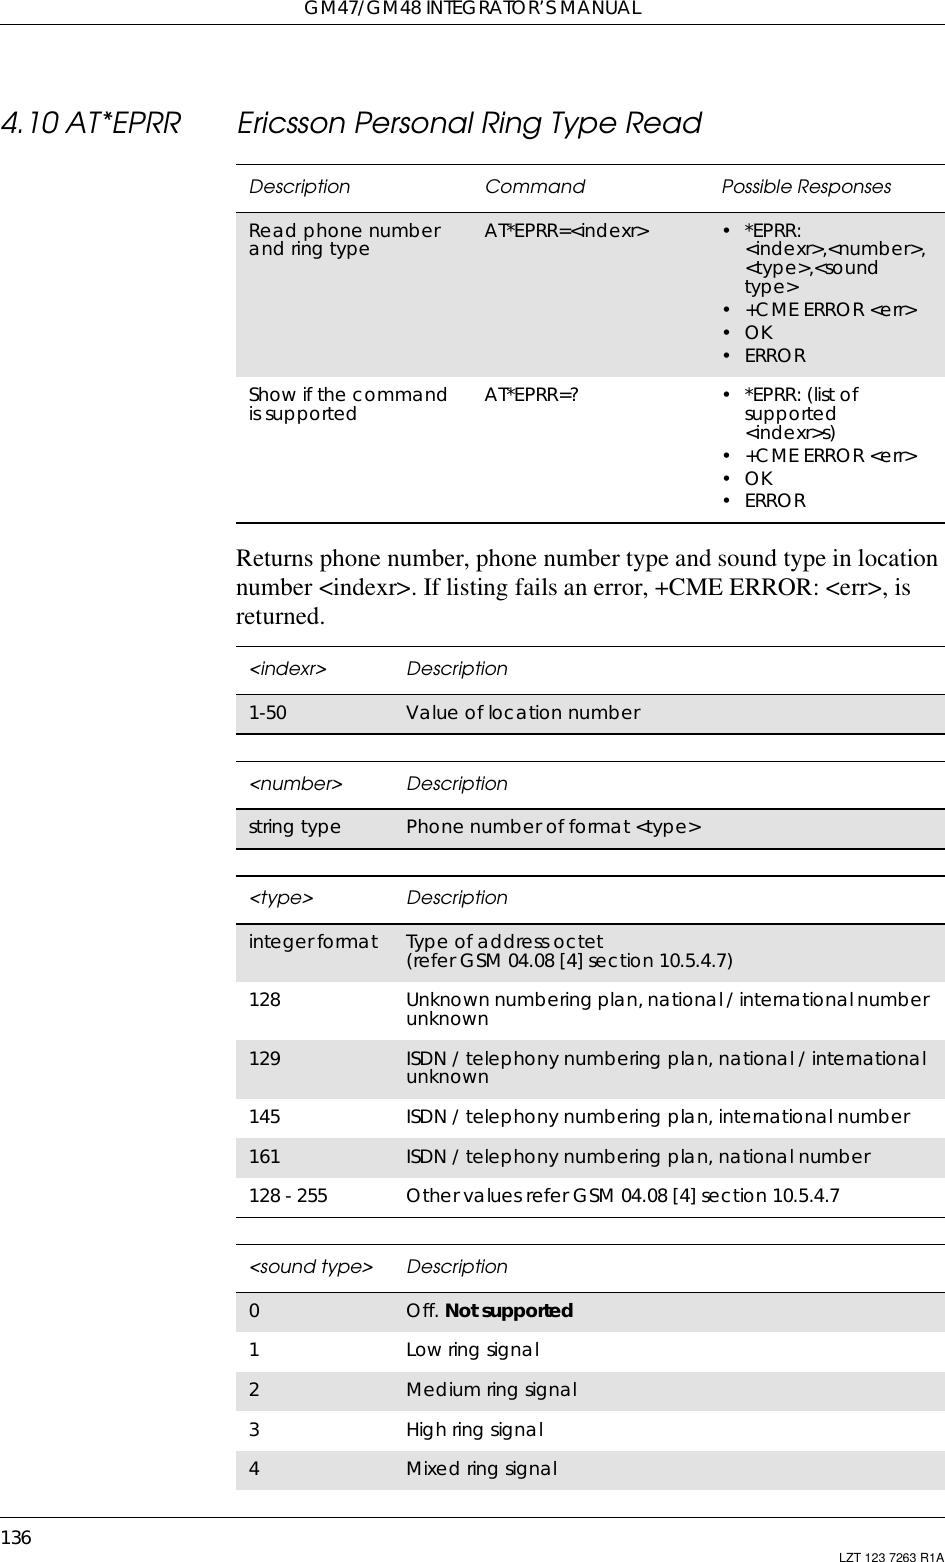 GM47/GM48 INTEGRATOR’S MANUAL136 LZT 123 7263 R1A4.10 AT*EPRR Ericsson Personal Ring Type ReadReturns phone number, phone number type and sound type in locationnumber &lt;indexr&gt;. If listing fails an error, +CME ERROR: &lt;err&gt;, isreturned.Description Command Possible ResponsesRead phone numberand ring type AT*EPRR=&lt;indexr&gt; •*EPRR:&lt;indexr&gt;,&lt;number&gt;,&lt;type&gt;,&lt;soundtype&gt;• +CME ERROR &lt;err&gt;•OK•ERRORShow if the commandis supported AT*EPRR=? •*EPRR:(listofsupported&lt;indexr&gt;s)• +CME ERROR &lt;err&gt;•OK•ERROR&lt;indexr&gt; Description1-50 Value of location number&lt;number&gt; Descriptionstring type Phone number of format &lt;type&gt;&lt;type&gt; Descriptioninteger format Type of address octet(refer GSM 04.08 [4] section 10.5.4.7)128 Unknown numbering plan, national / international numberunknown129 ISDN / telephony numbering plan, national / internationalunknown145 ISDN / telephony numbering plan, international number161 ISDN / telephony numbering plan, national number128 - 255 Other values refer GSM 04.08 [4] section 10.5.4.7&lt;sound type&gt; Description0Off. Not supported1Low ring signal2Medium ring signal3High ring signal4Mixed ring signal